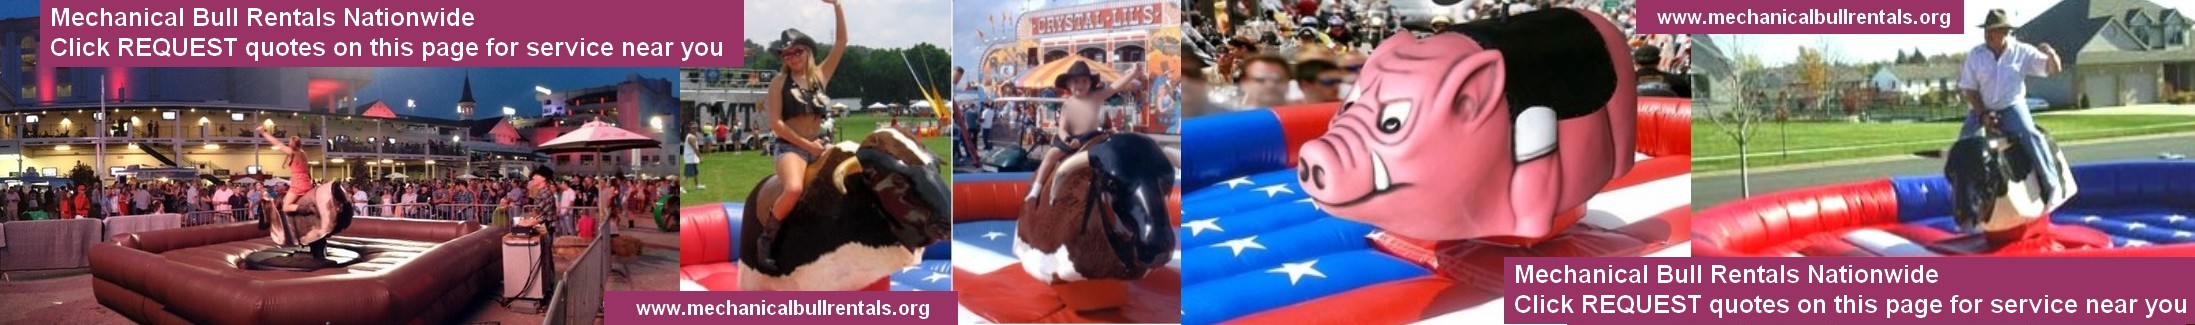 Mechanical Bull Rentals Tampa Bay Florida FL and near you. Free referrals to local mechanical bull companies LOGO